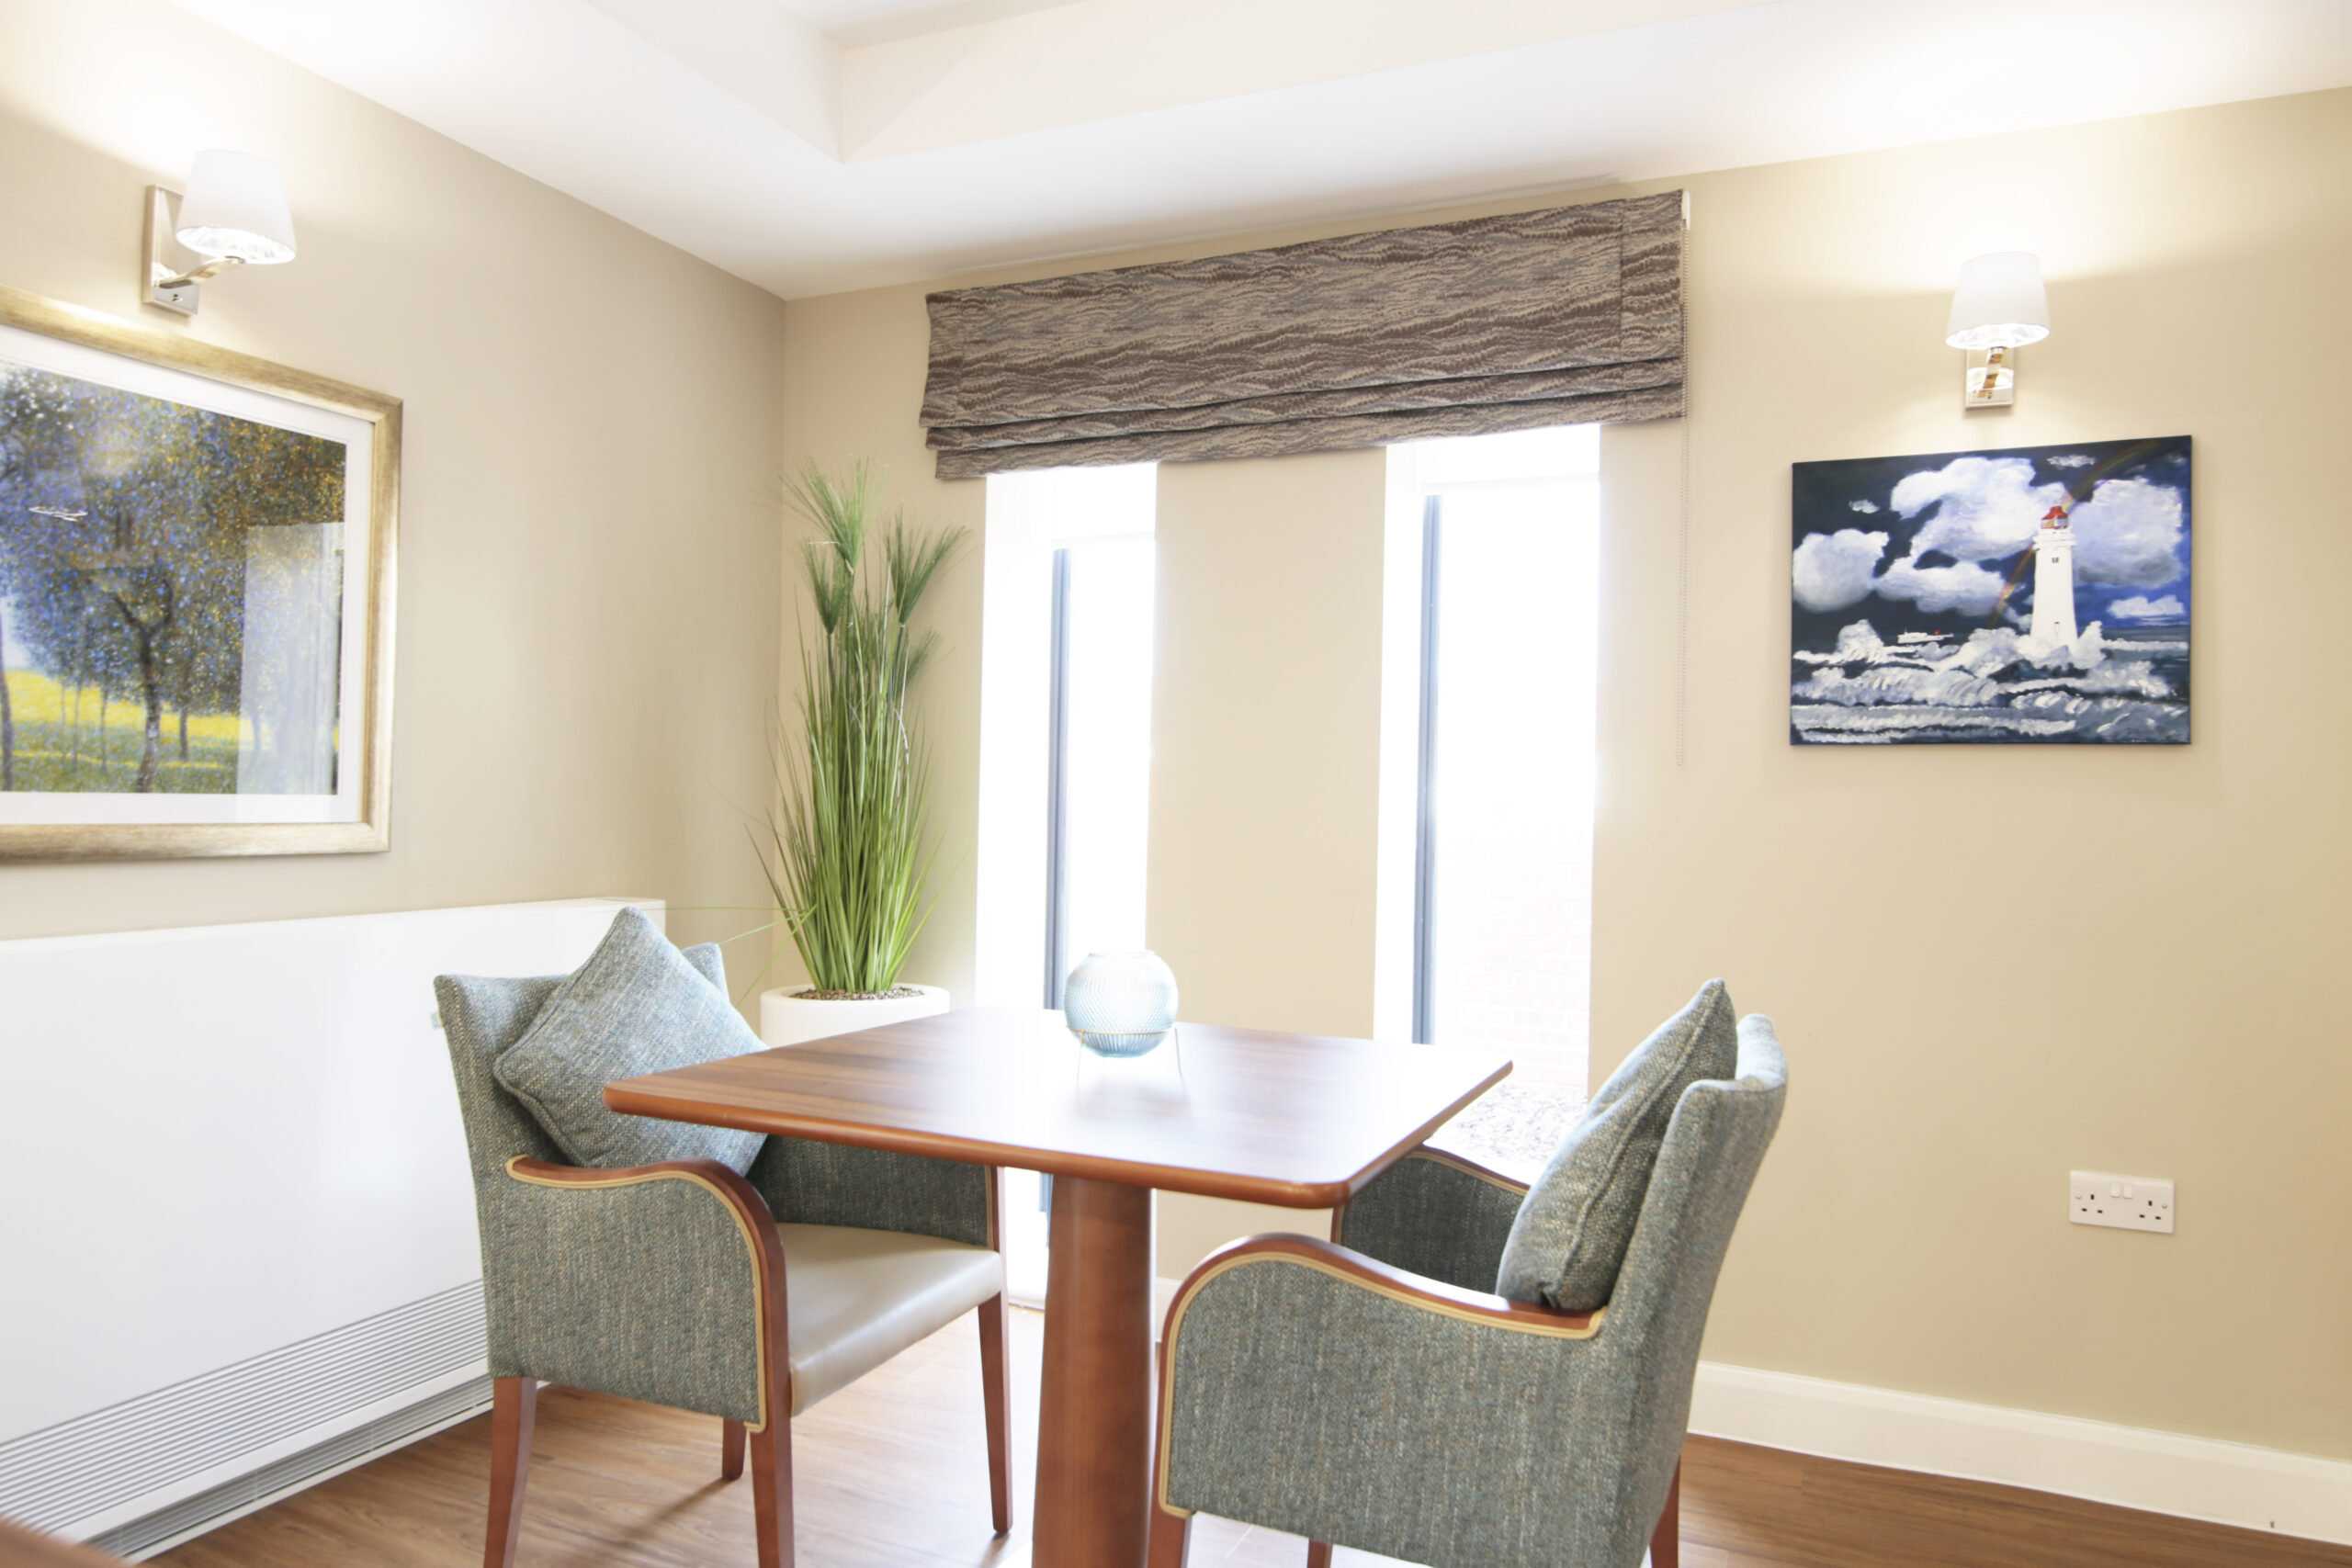 Care home dining area